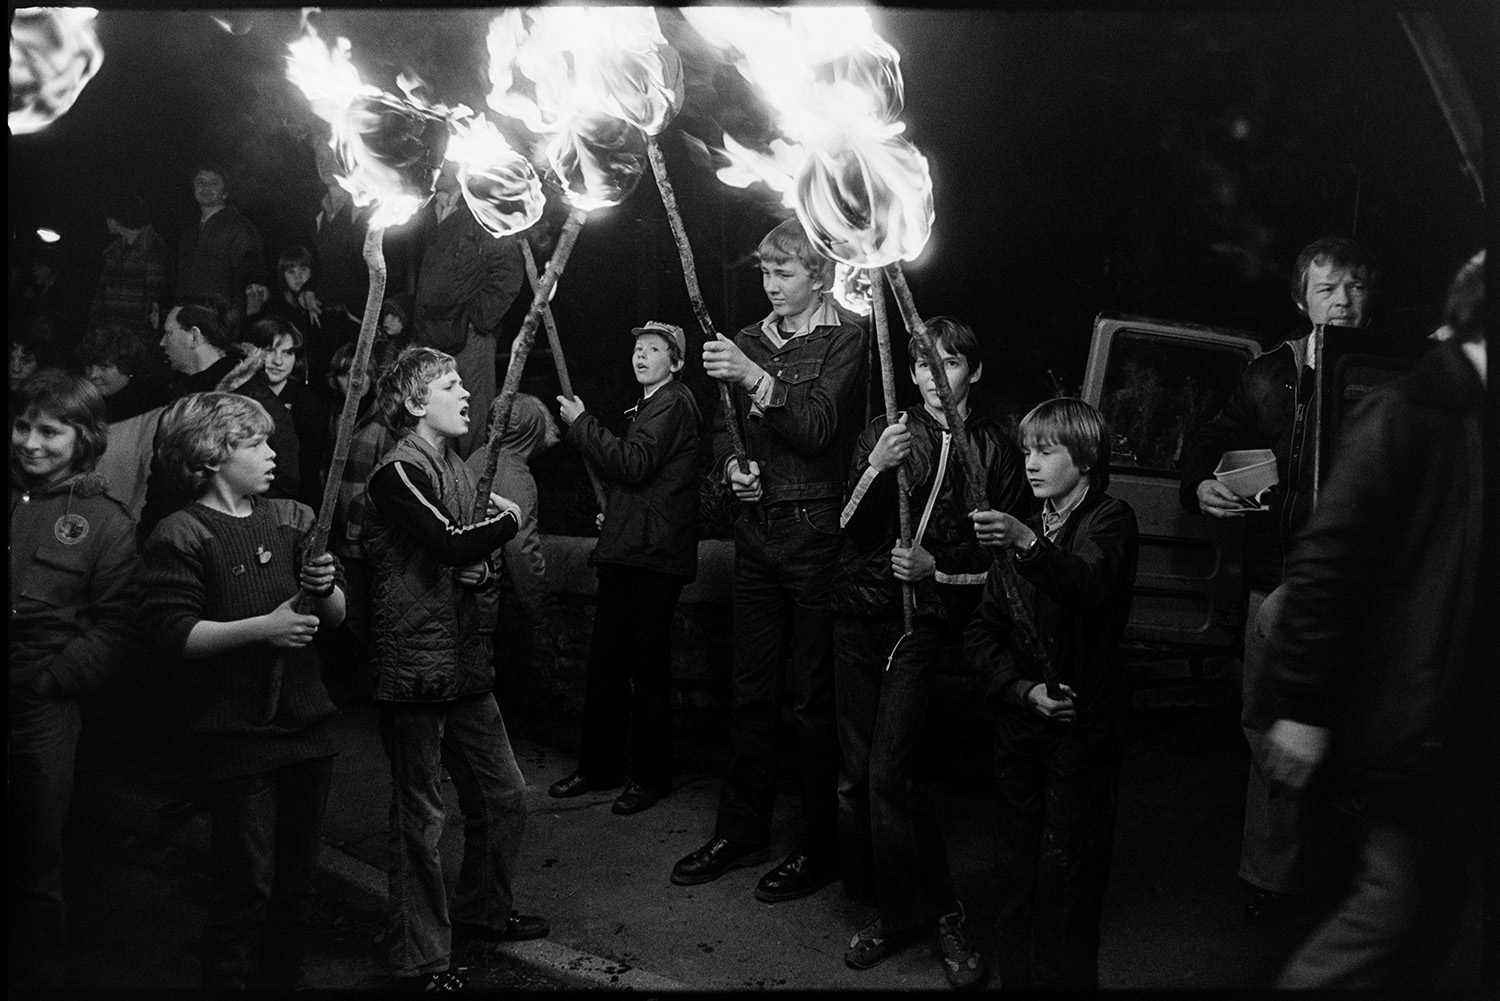 Carnival floats at night people in fancy dress, flares, Bride and Groom. 
[A group of boys holding flaming torches at Dolton Carnival.]